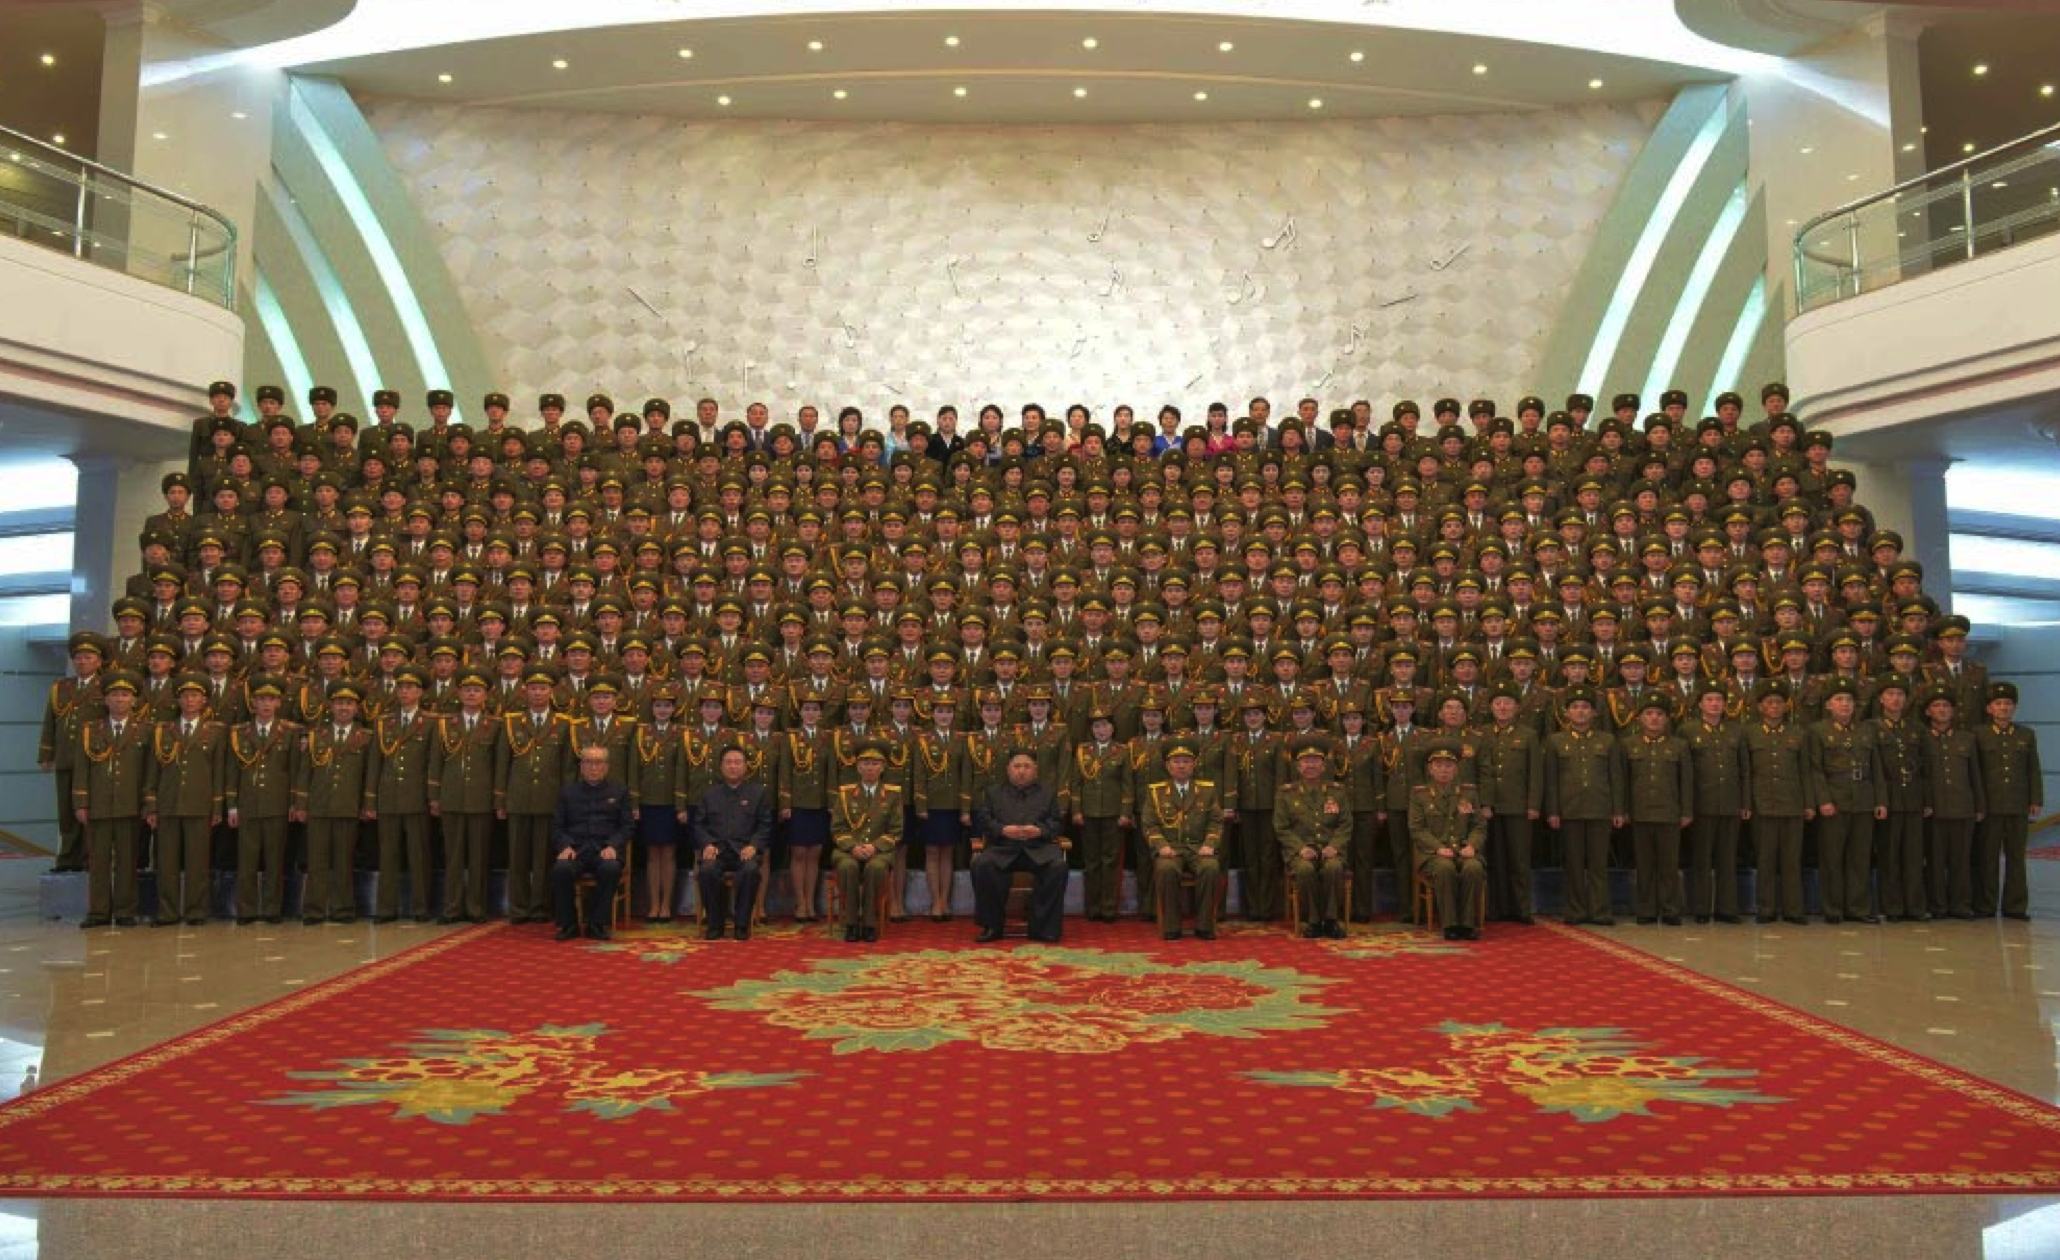 Kim Jong Un, senior DPRK officials and members of the State Merited Chorus (Merited State Choir) pose for commemorative photograph in the lobby of the People's Theater in Pyongyang on February 22, 2017 in a photo which appeared top-center of the front page of February 23, 2017 edition of the WPK daily organ Rodong Sinmun.